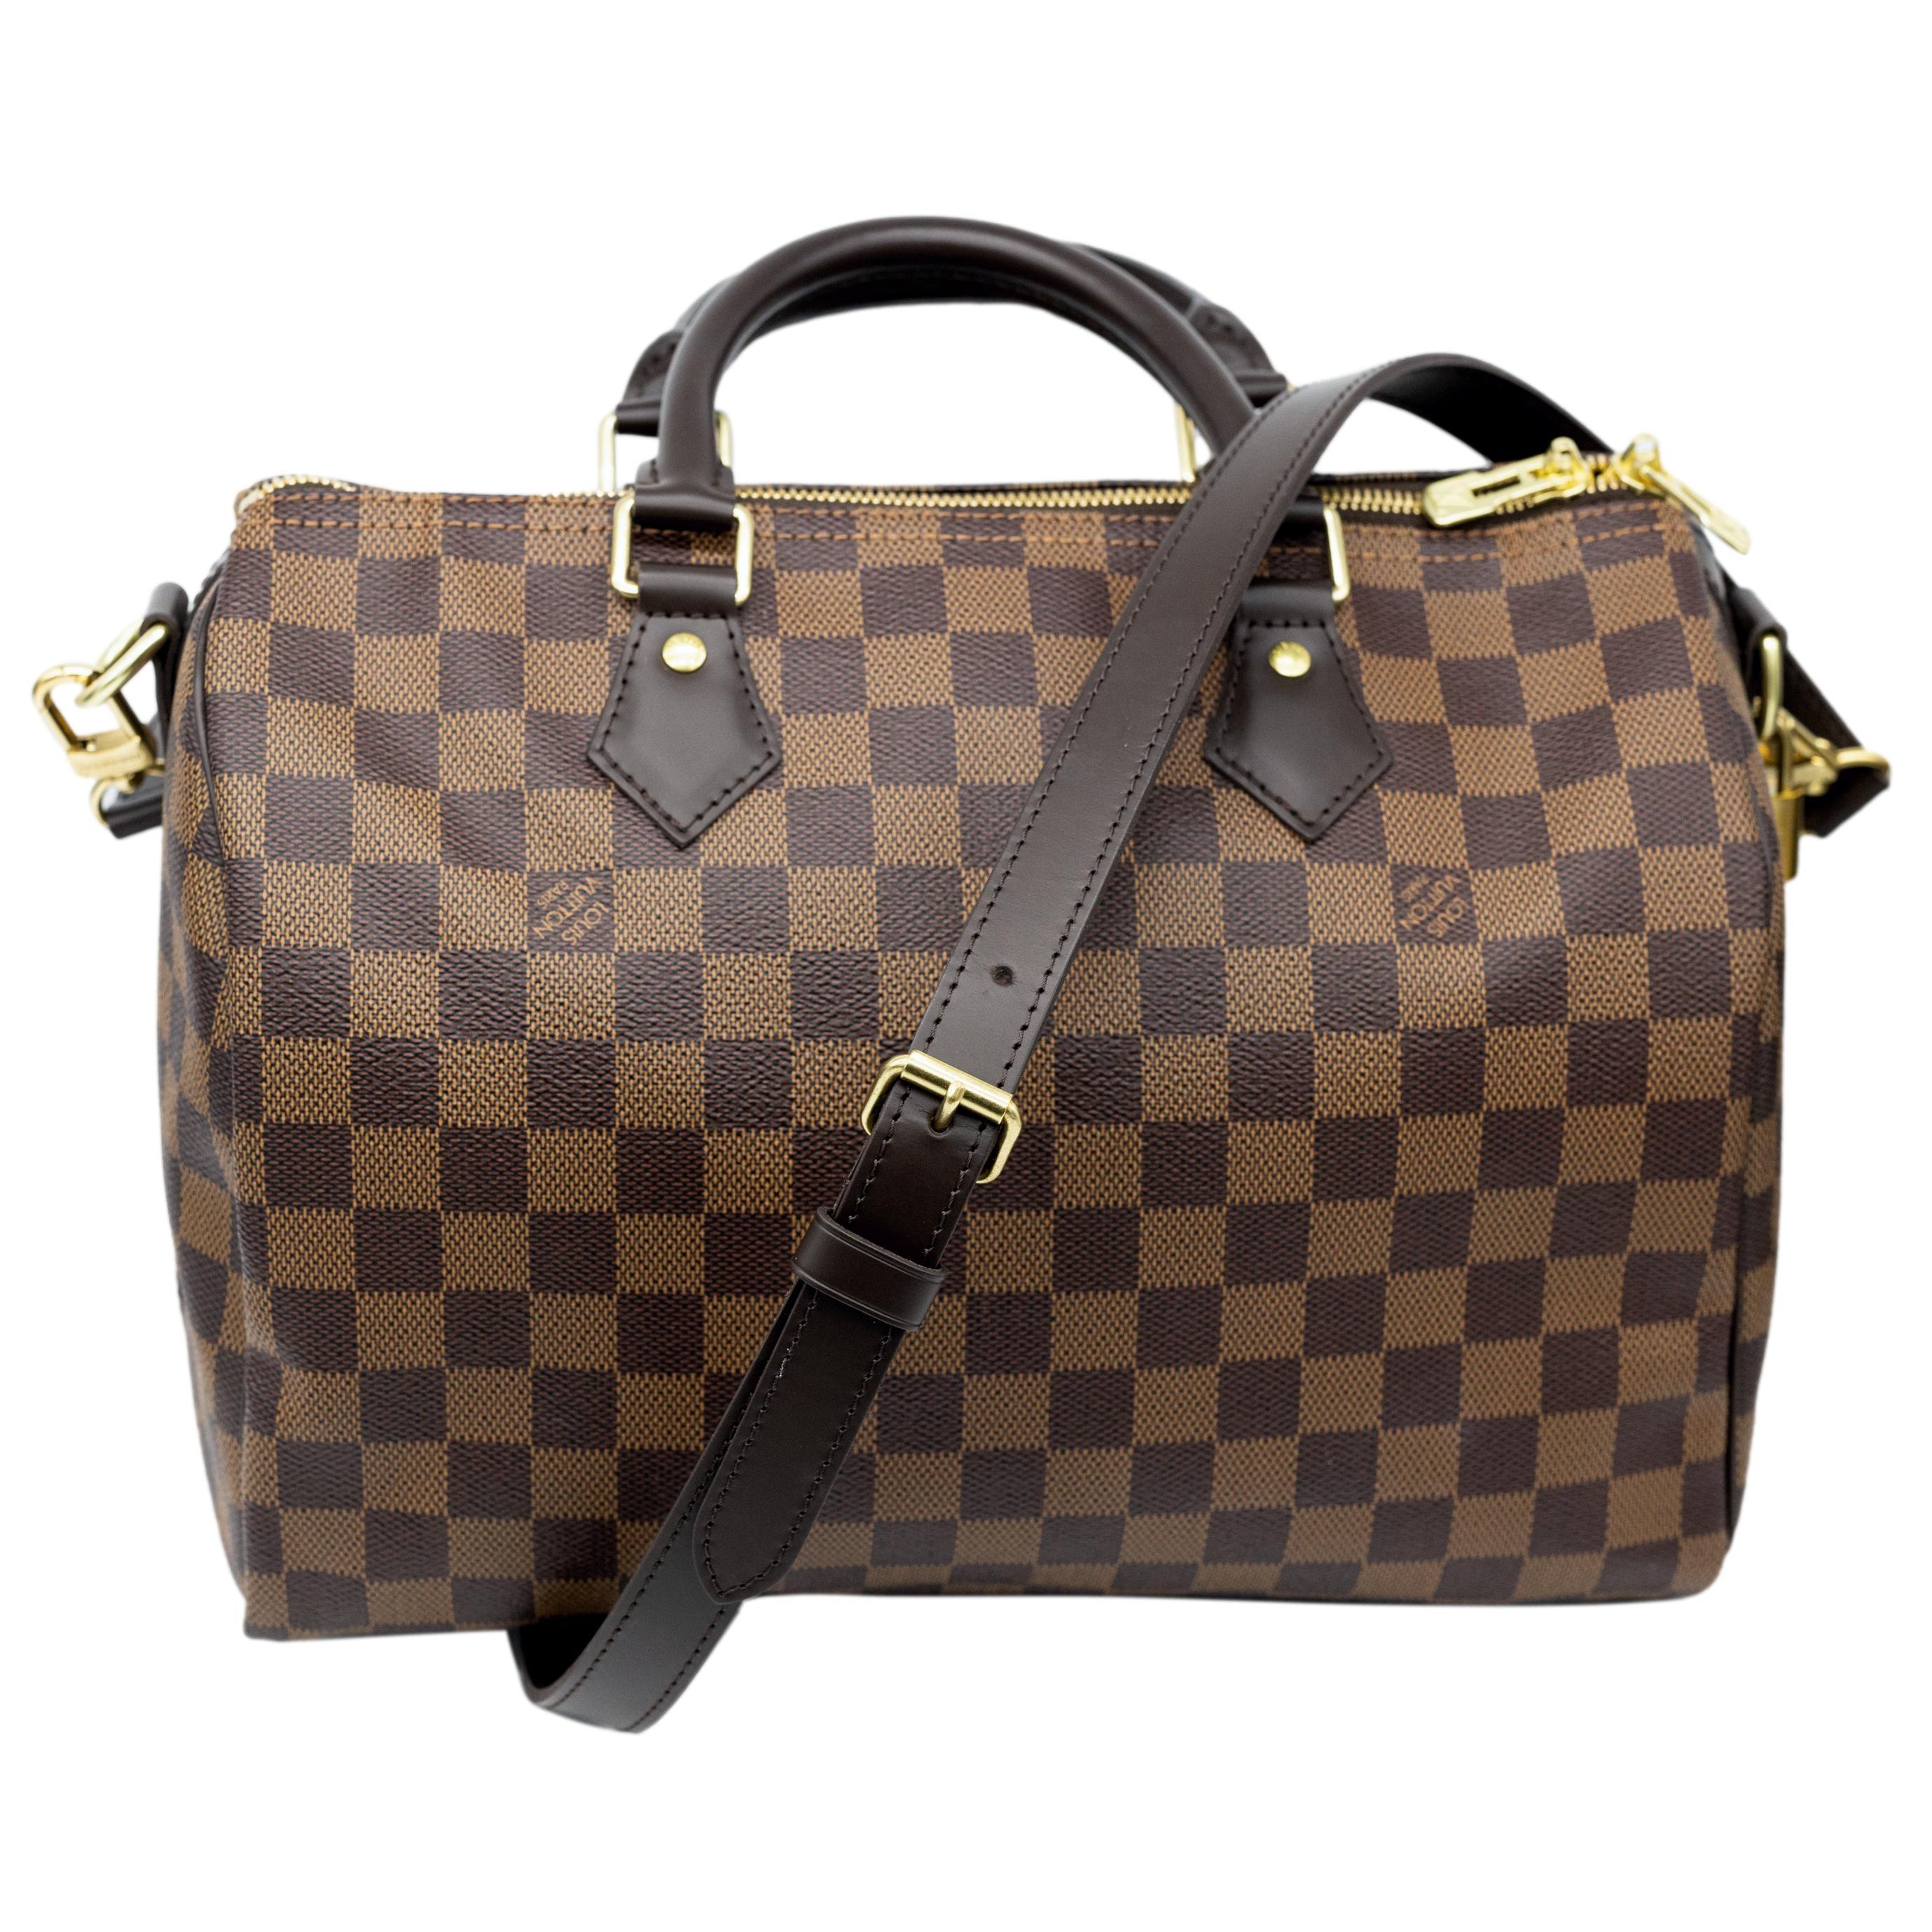 Louis Vuitton Damier Ebene Speedy 30 Bandoulière Top Handle Bag, USA 2019. This iconic speedy was first introduced in the 1930's and was designed as an alternative for the larger 